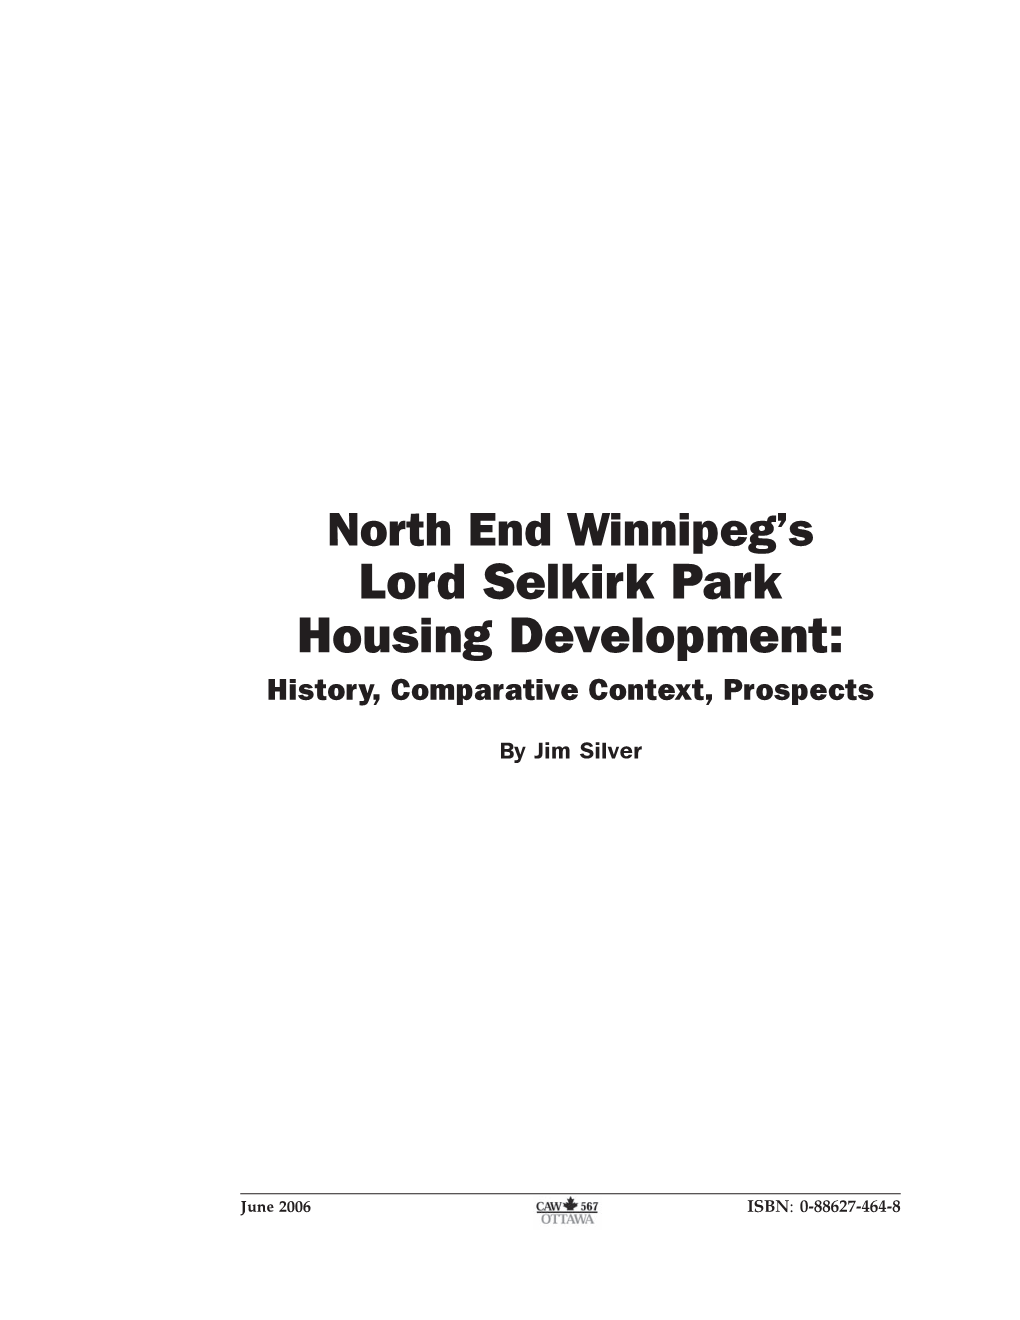 Lord Selkirk Park Housing Development: History, Comparative Context, Prospects